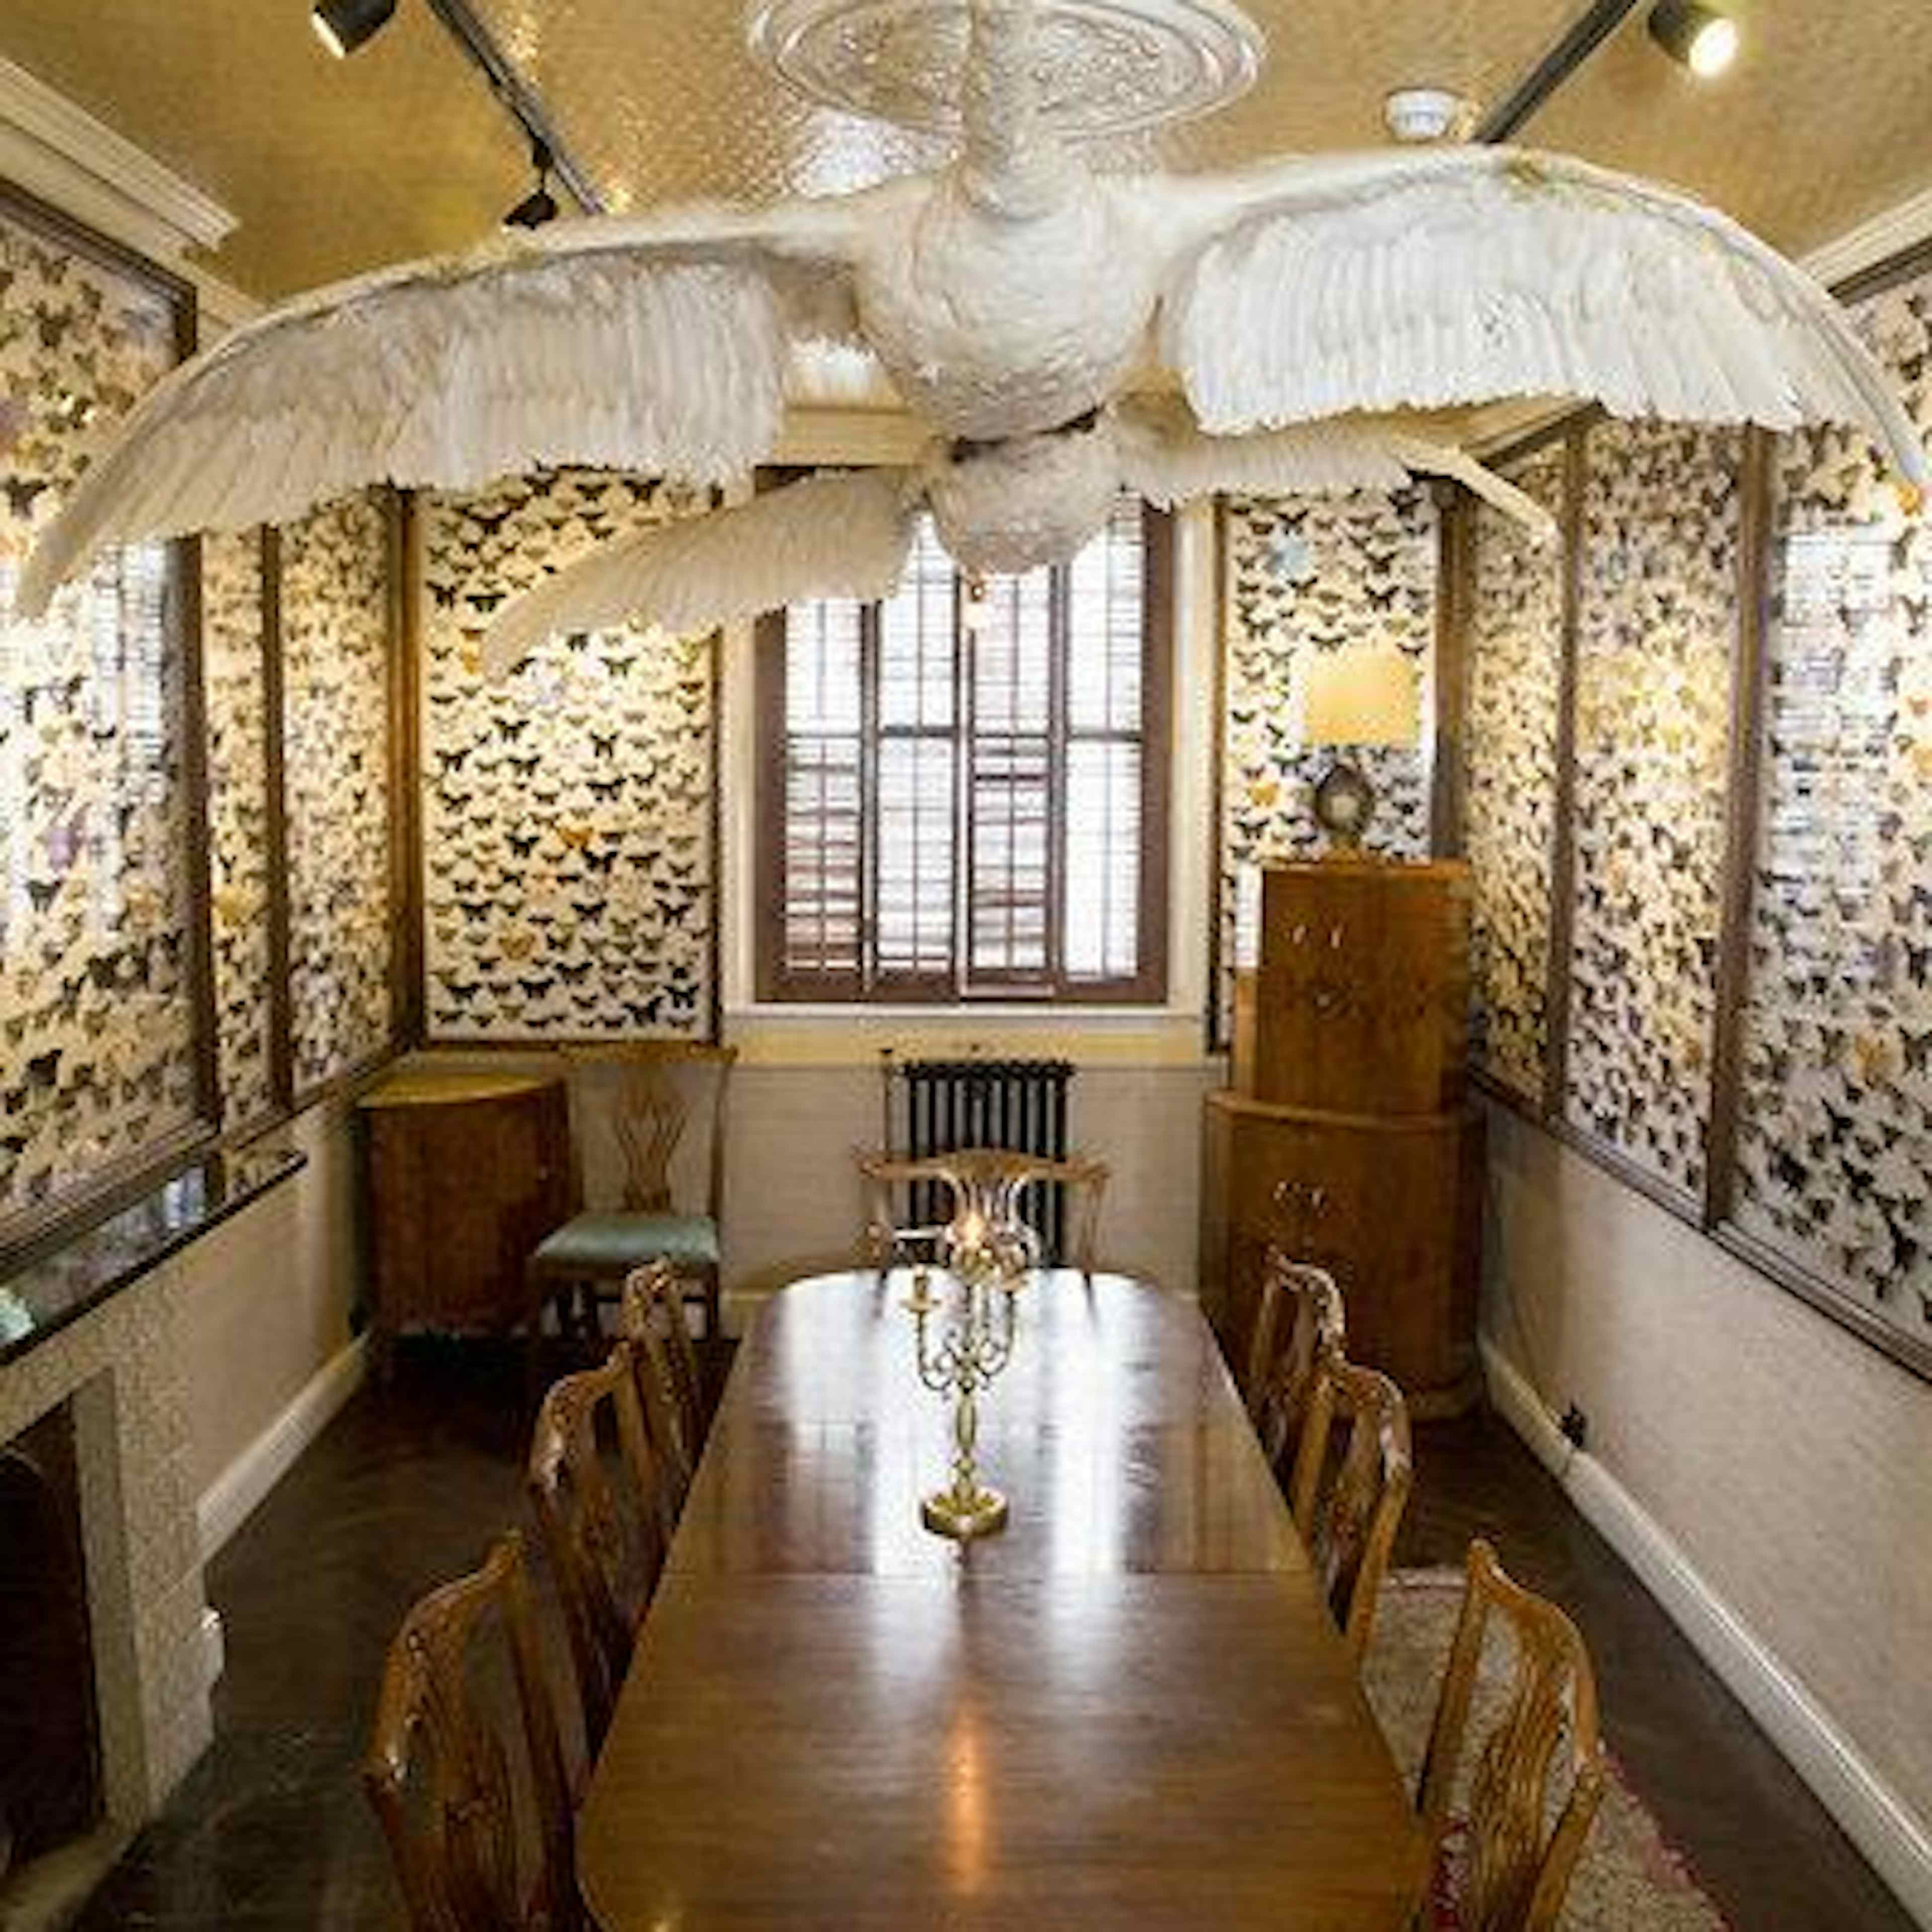 The King's Head Members Club - The Butterfly Room image 2